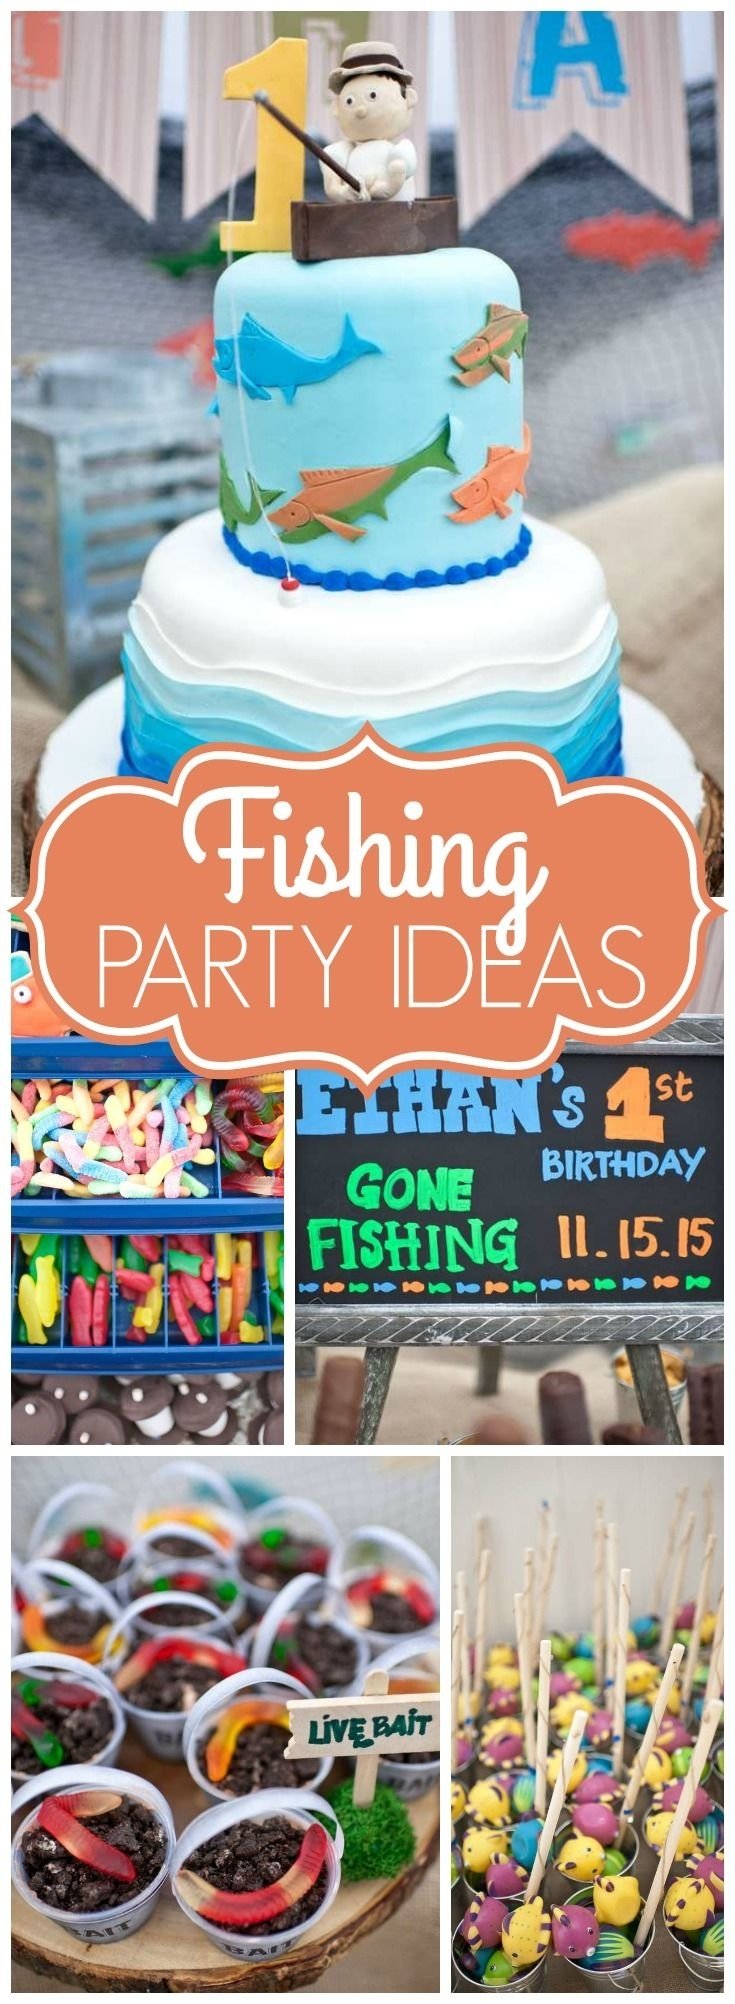 10 Most Popular 1St Birthday Party Ideas For Boys Themes themes birthday 1st bday party ideas for baby boy in conjunction 1 2022